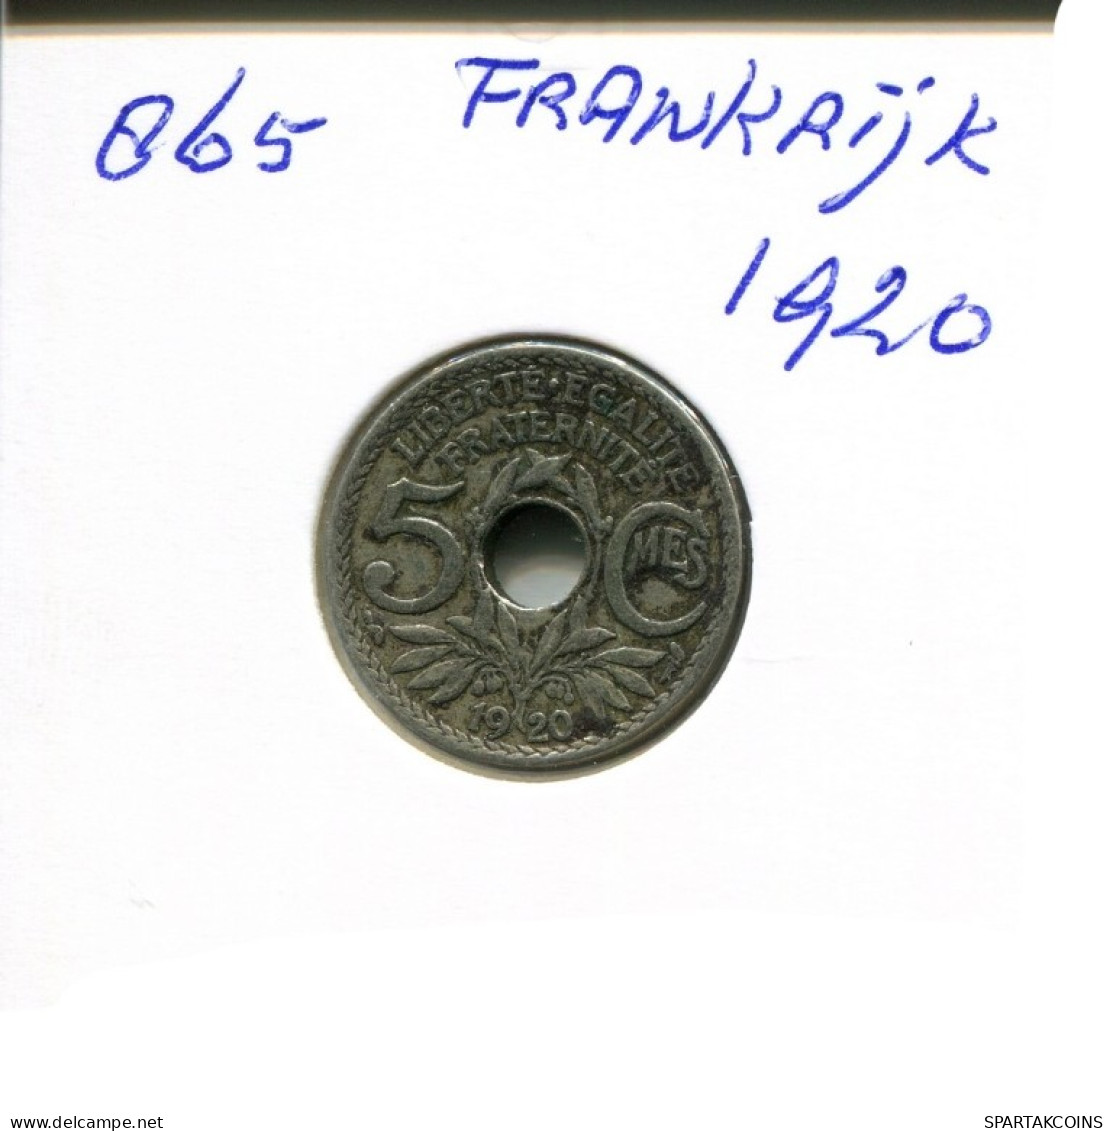 5 CENTIMES 1920 FRANCE French Coin #AM983.U.A - 5 Centimes